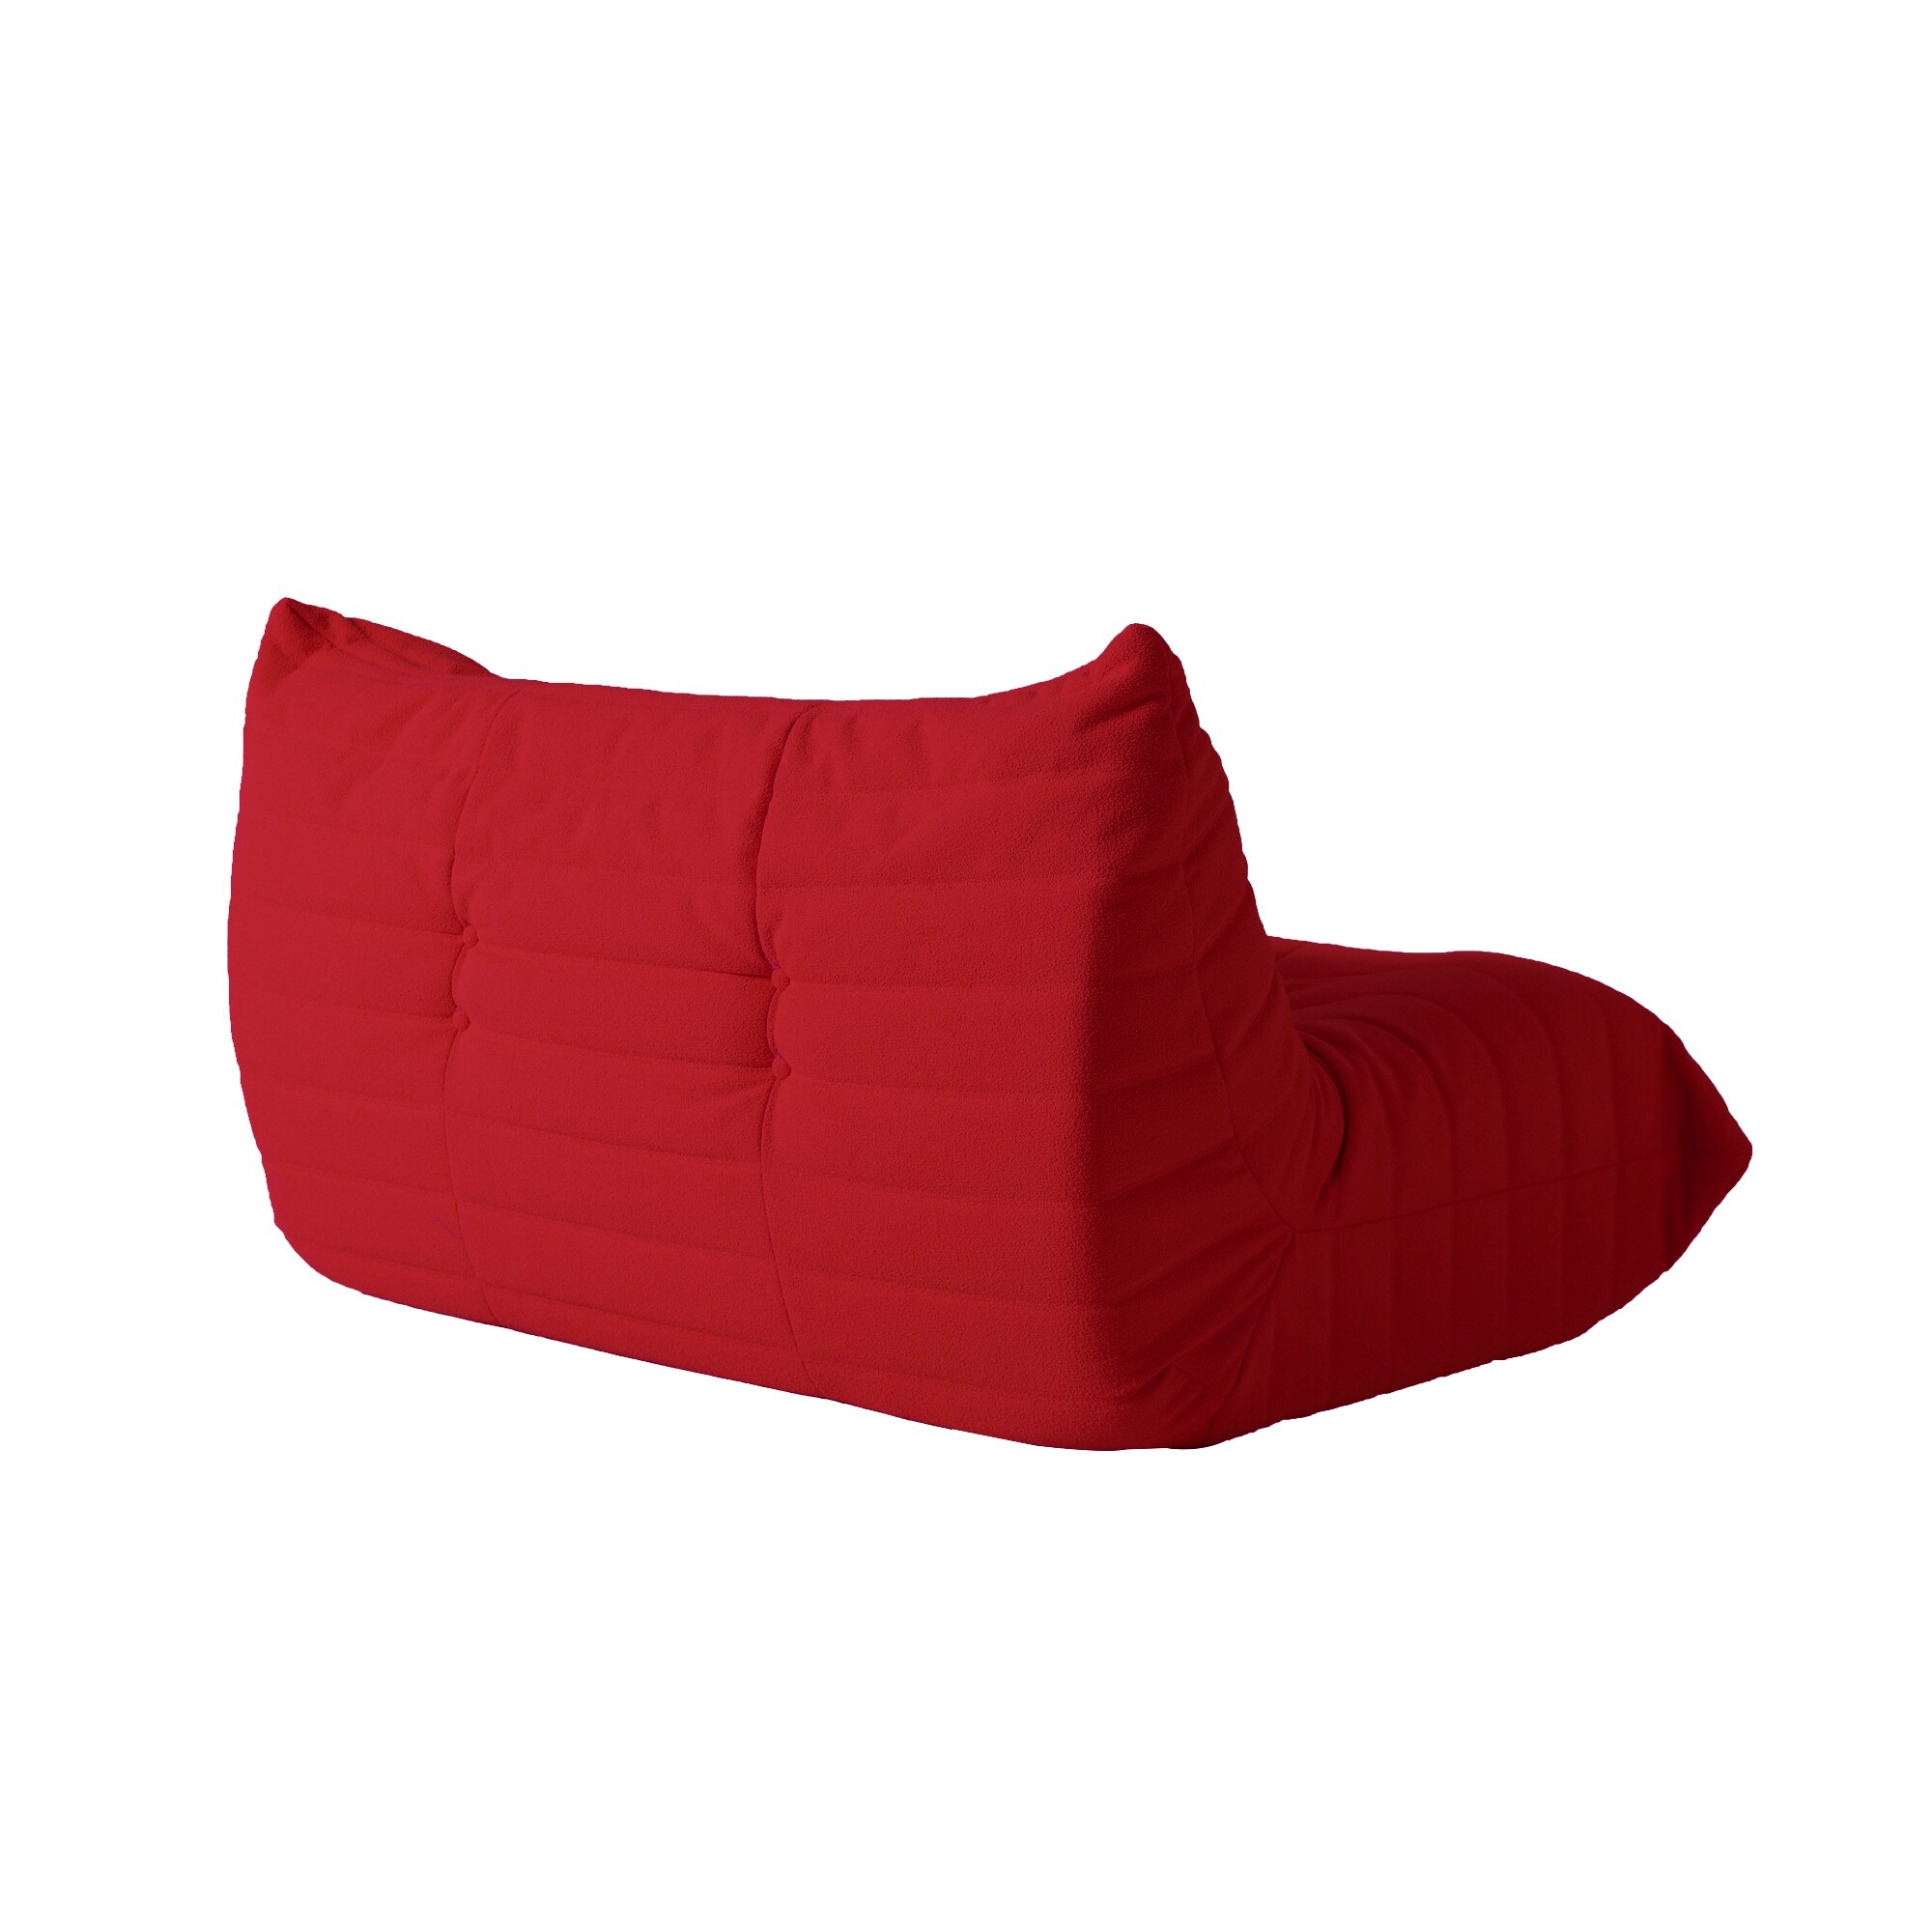 https://ak1.ostkcdn.com/images/products/is/images/direct/5ae973ab7d2ad7ff9e1c80a7b75e5cd2d08dd6ba/Teddy-Velvet-Floor-Couch%2CComfortable-Back-Support-Lazy-Sofa-with-Ottoman.jpg